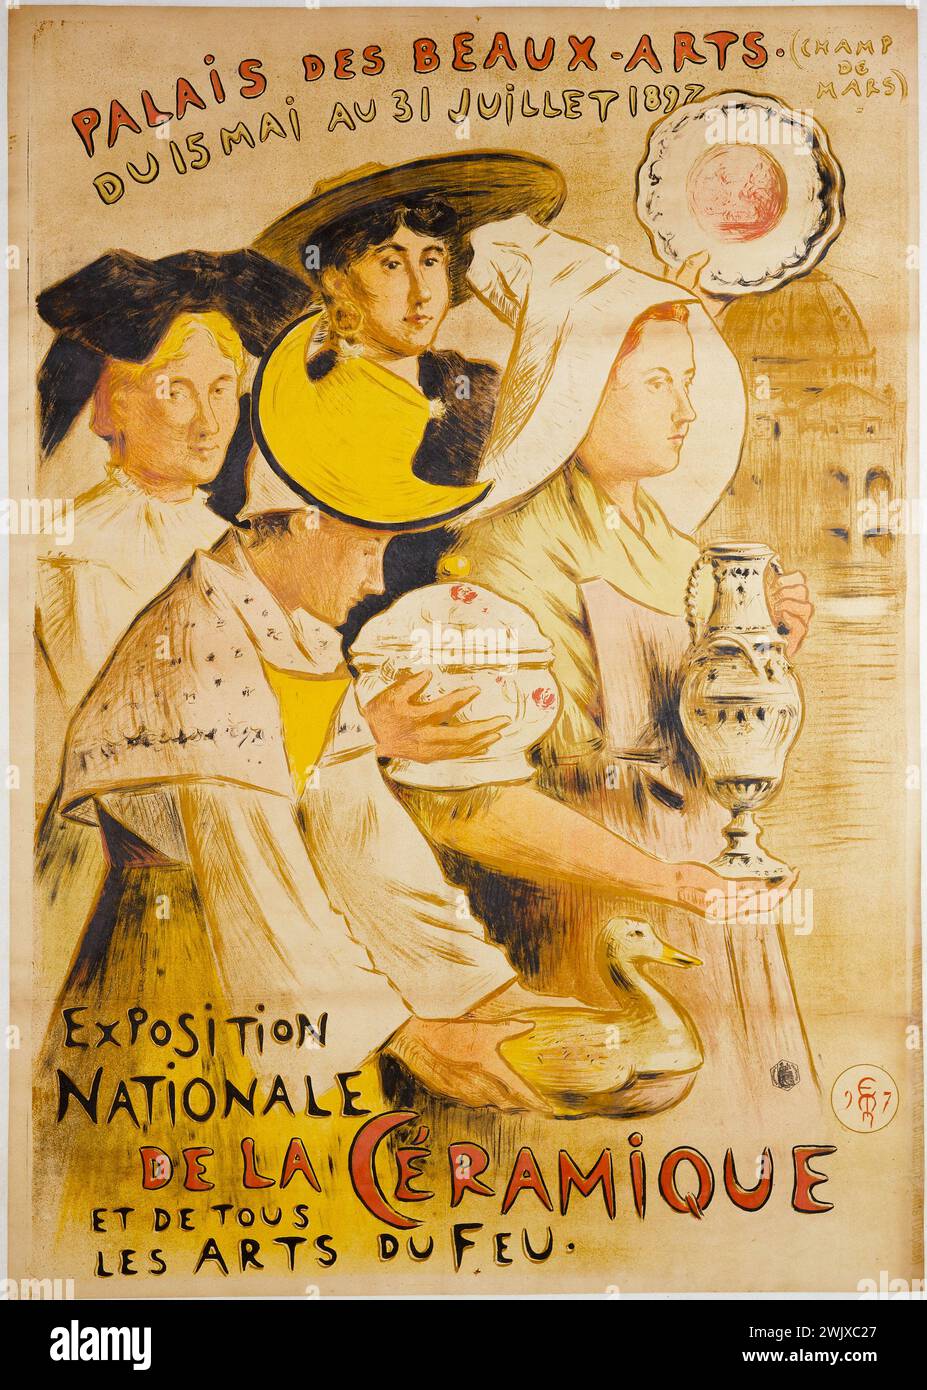 Etienne Moreau-Nelaton (1859-1927). Charles Verneau printing house. National exhibition of ceramics and all the arts of fire, Palais des Beaux-Arts. Poster. Color lithography, 1897. Paris, Carnavalet museum. Fire, poster, ceramic, regional suit, national exhibition, color lithography, Beaux-Arts palace Stock Photo